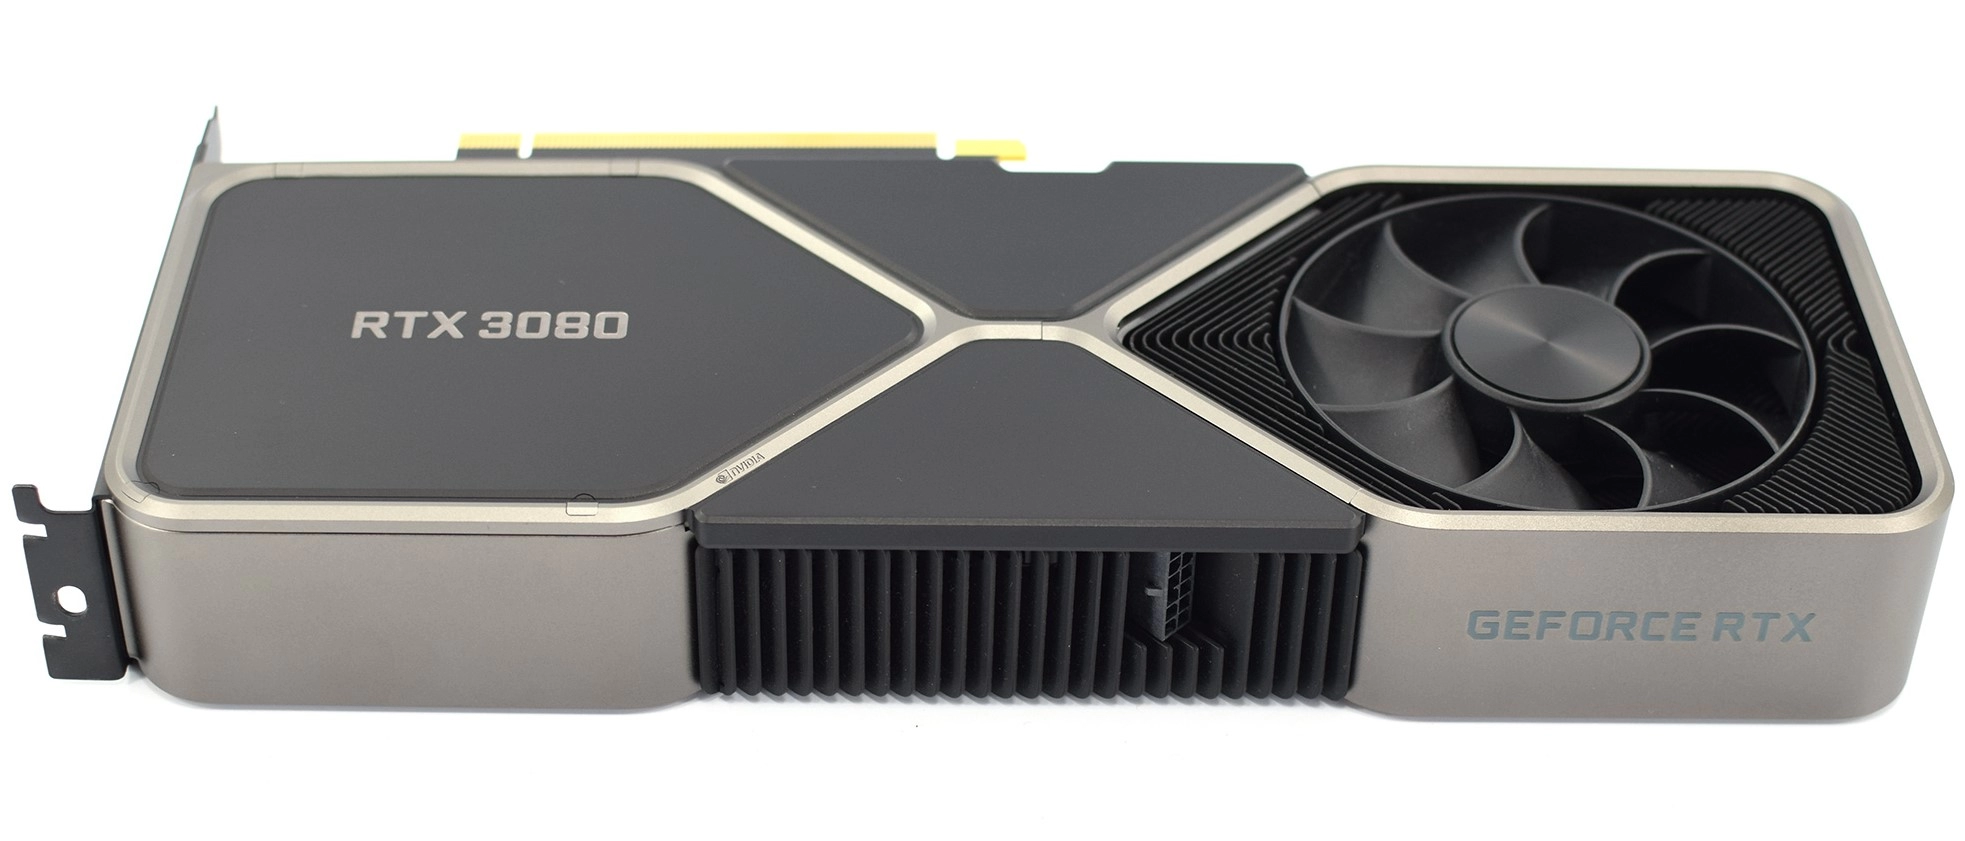 NVIDIA GeForce RTX 3080 Front View